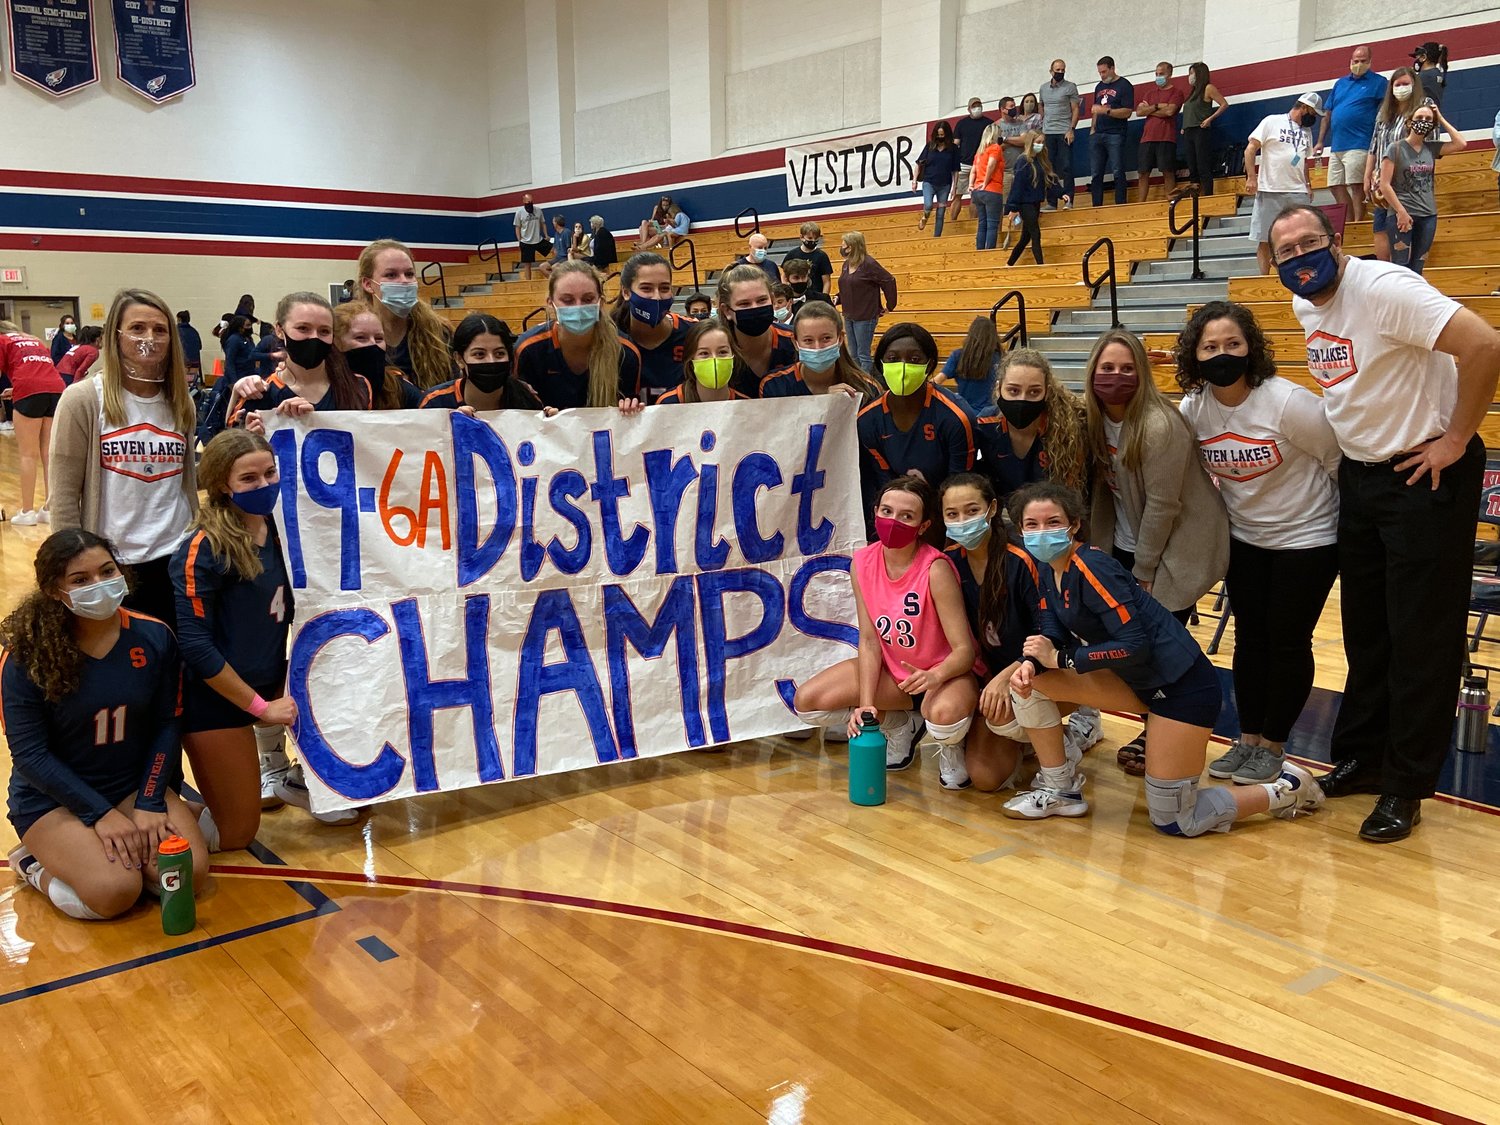 Though they easily secured their third district championship in five years, the Seven Lakes Spartans enter the playoffs coming off their first loss of the season due to a 3-1 Tompkins win on Saturday at Tompkins High.